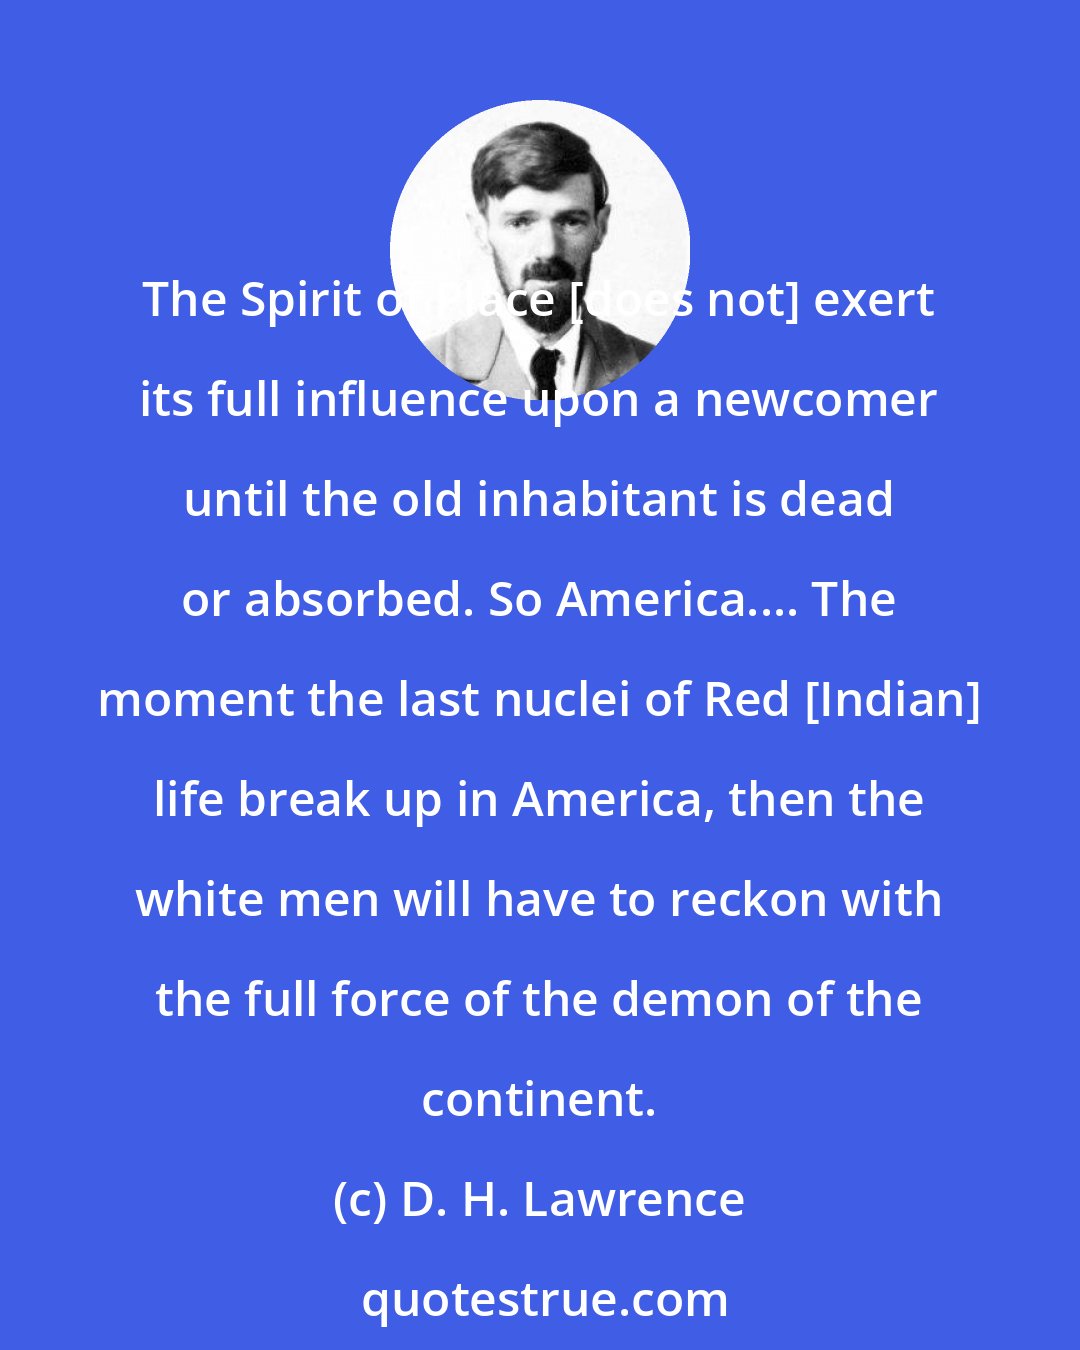 D. H. Lawrence: The Spirit of Place [does not] exert its full influence upon a newcomer until the old inhabitant is dead or absorbed. So America.... The moment the last nuclei of Red [Indian] life break up in America, then the white men will have to reckon with the full force of the demon of the continent.